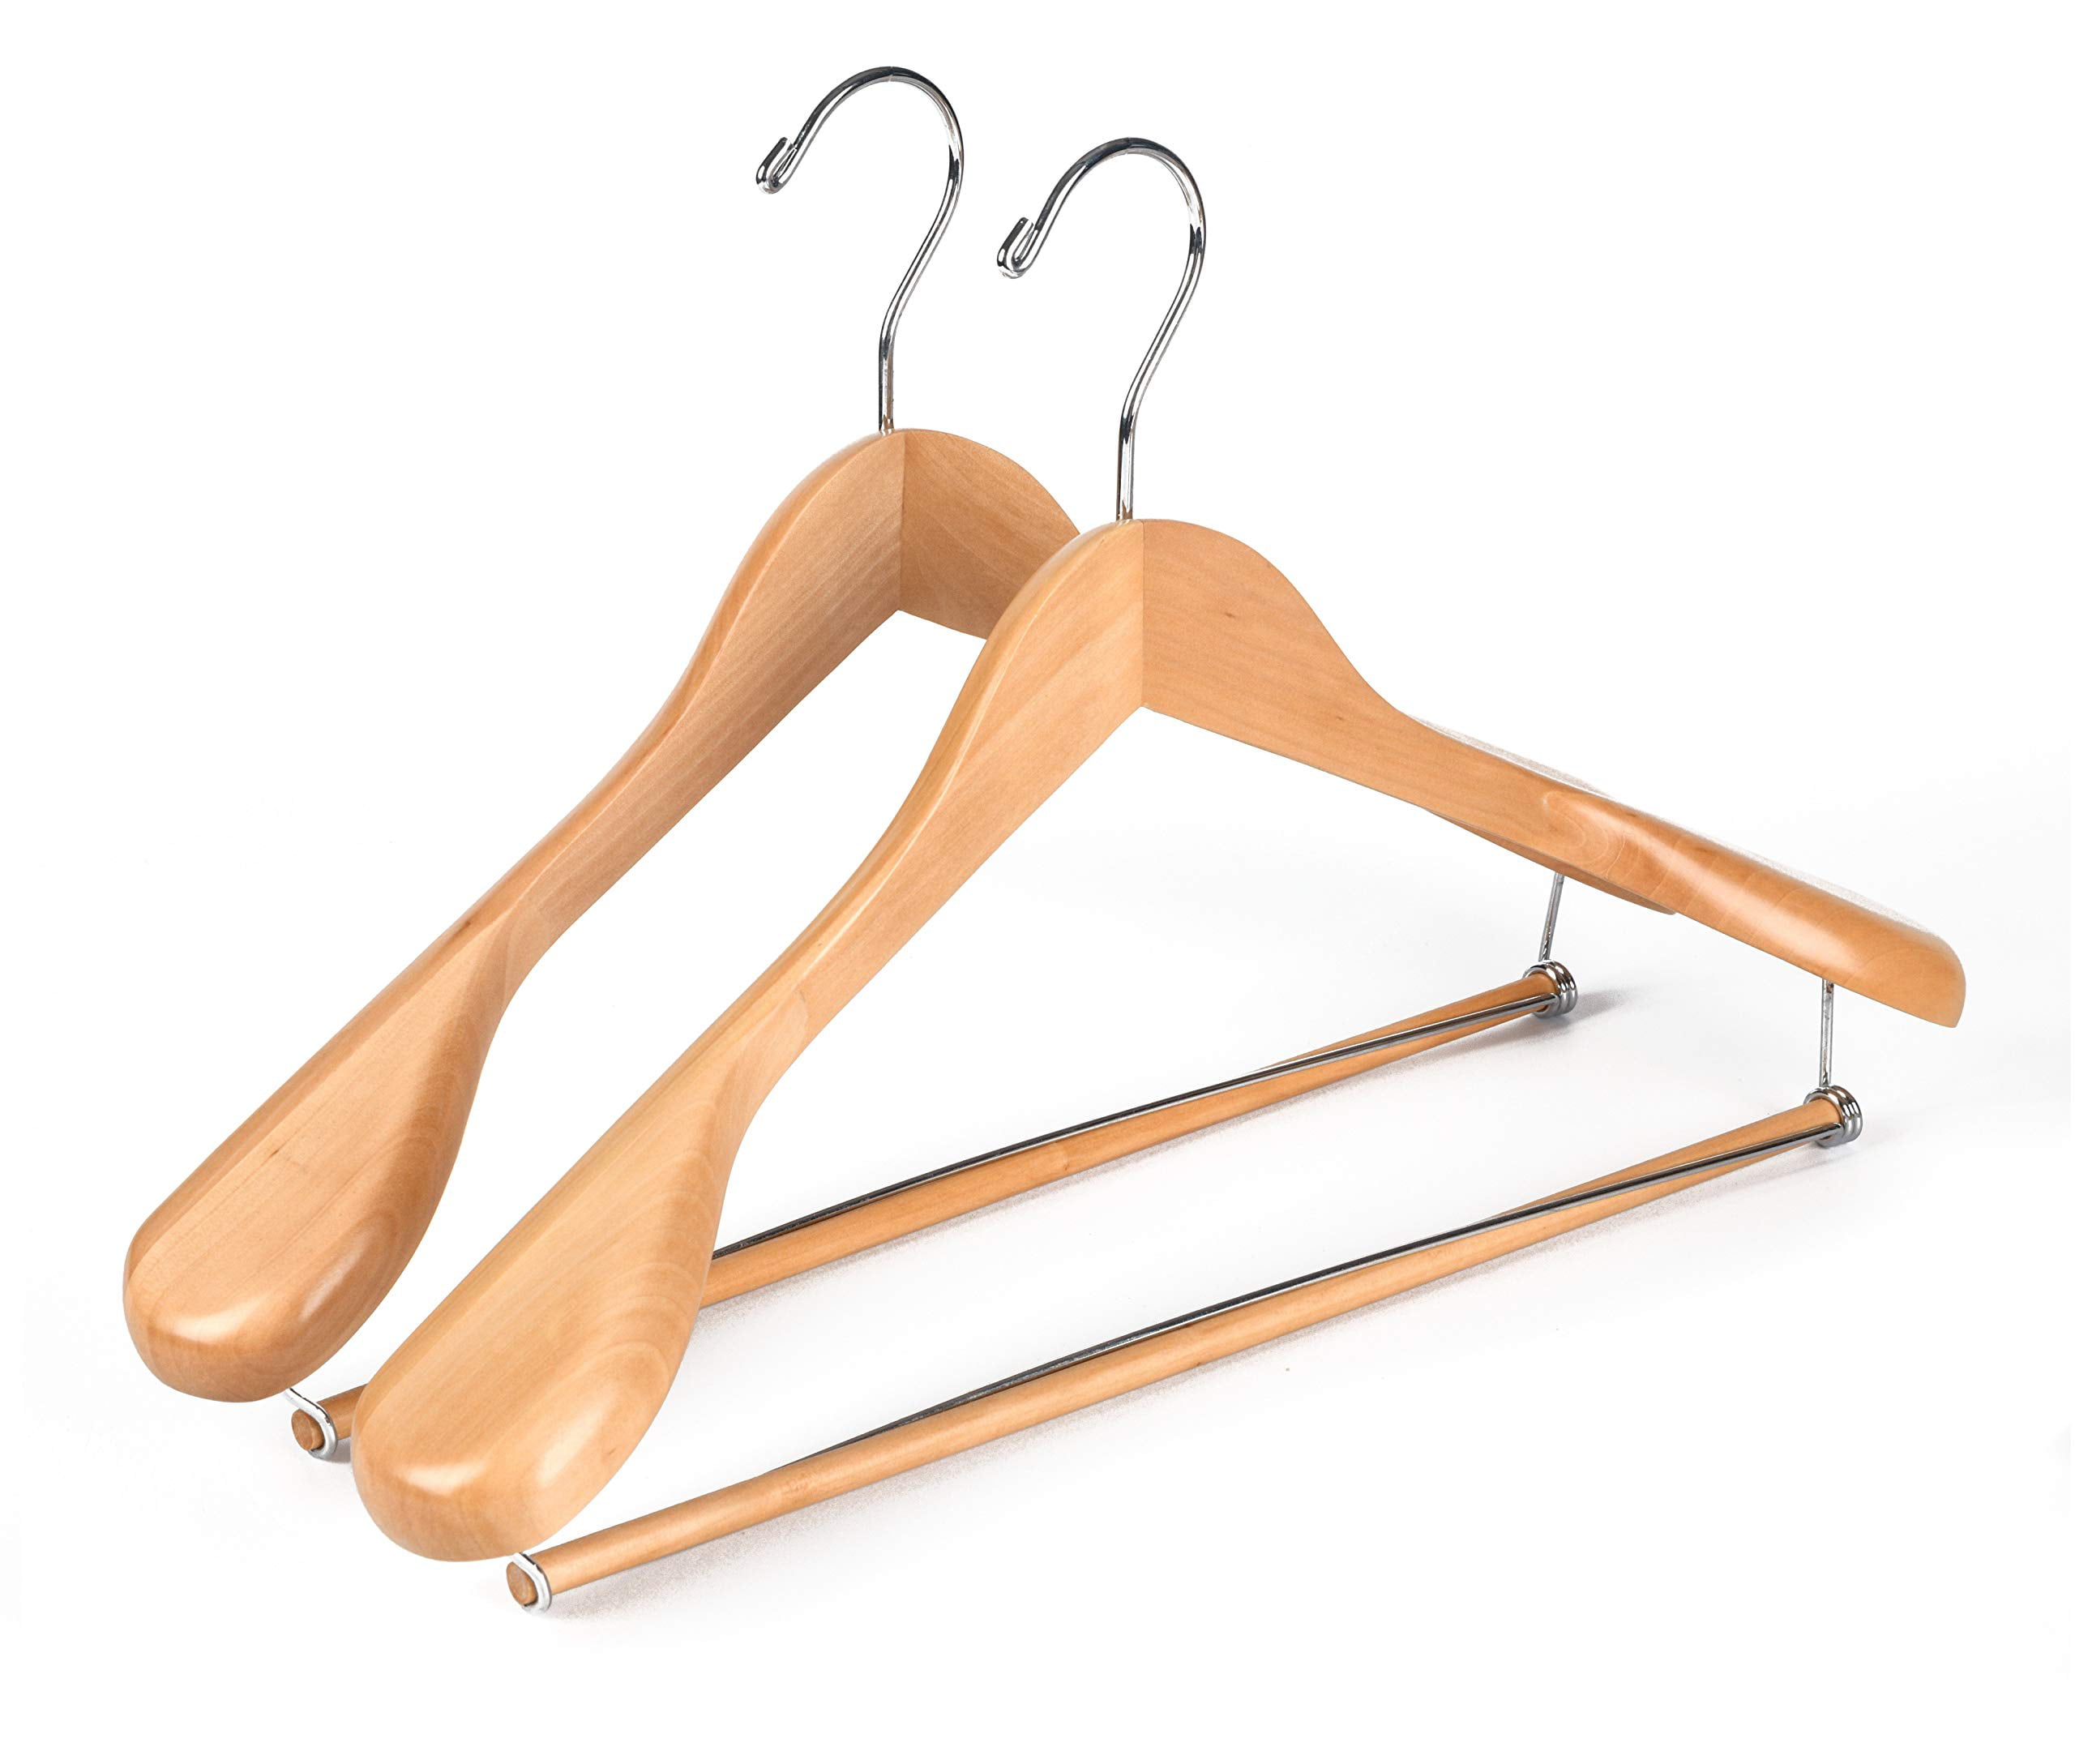 Suit Hangers Coat Jacket Dress Natural - with bar Clothing Better to U 17.5 Solid Wooden Hangers for Clothes